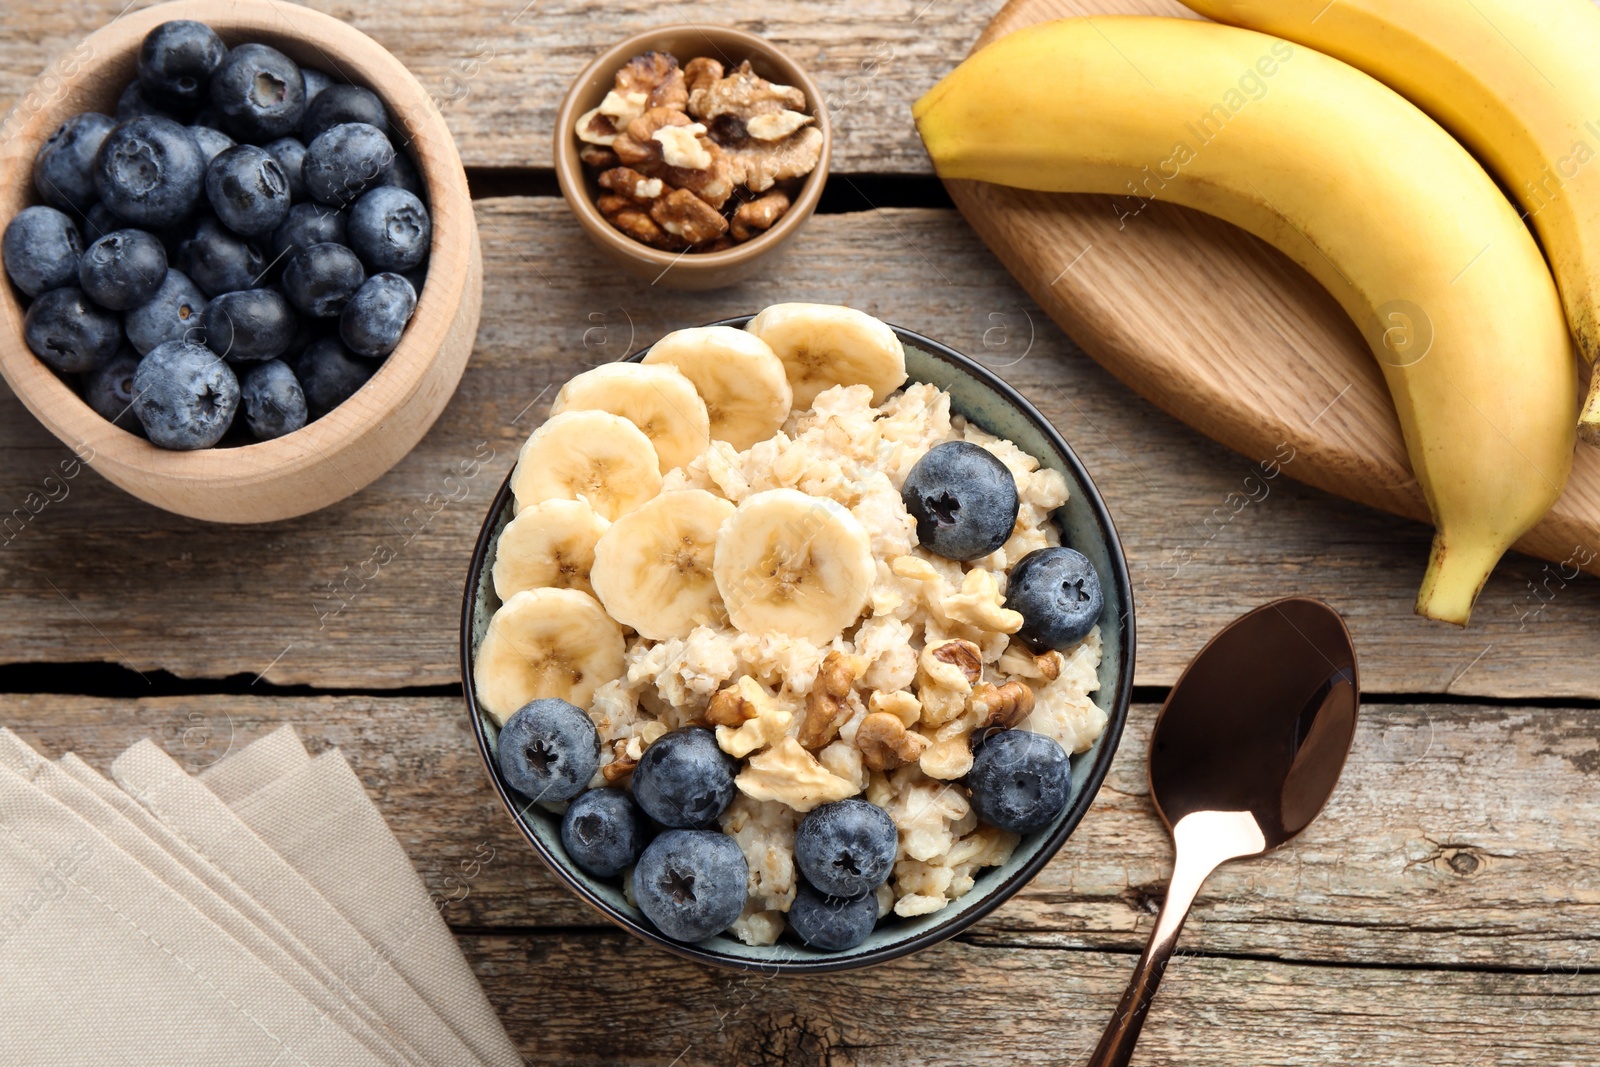 Photo of Tasty oatmeal with banana, blueberries and walnuts served in bowl on wooden table, flat lay